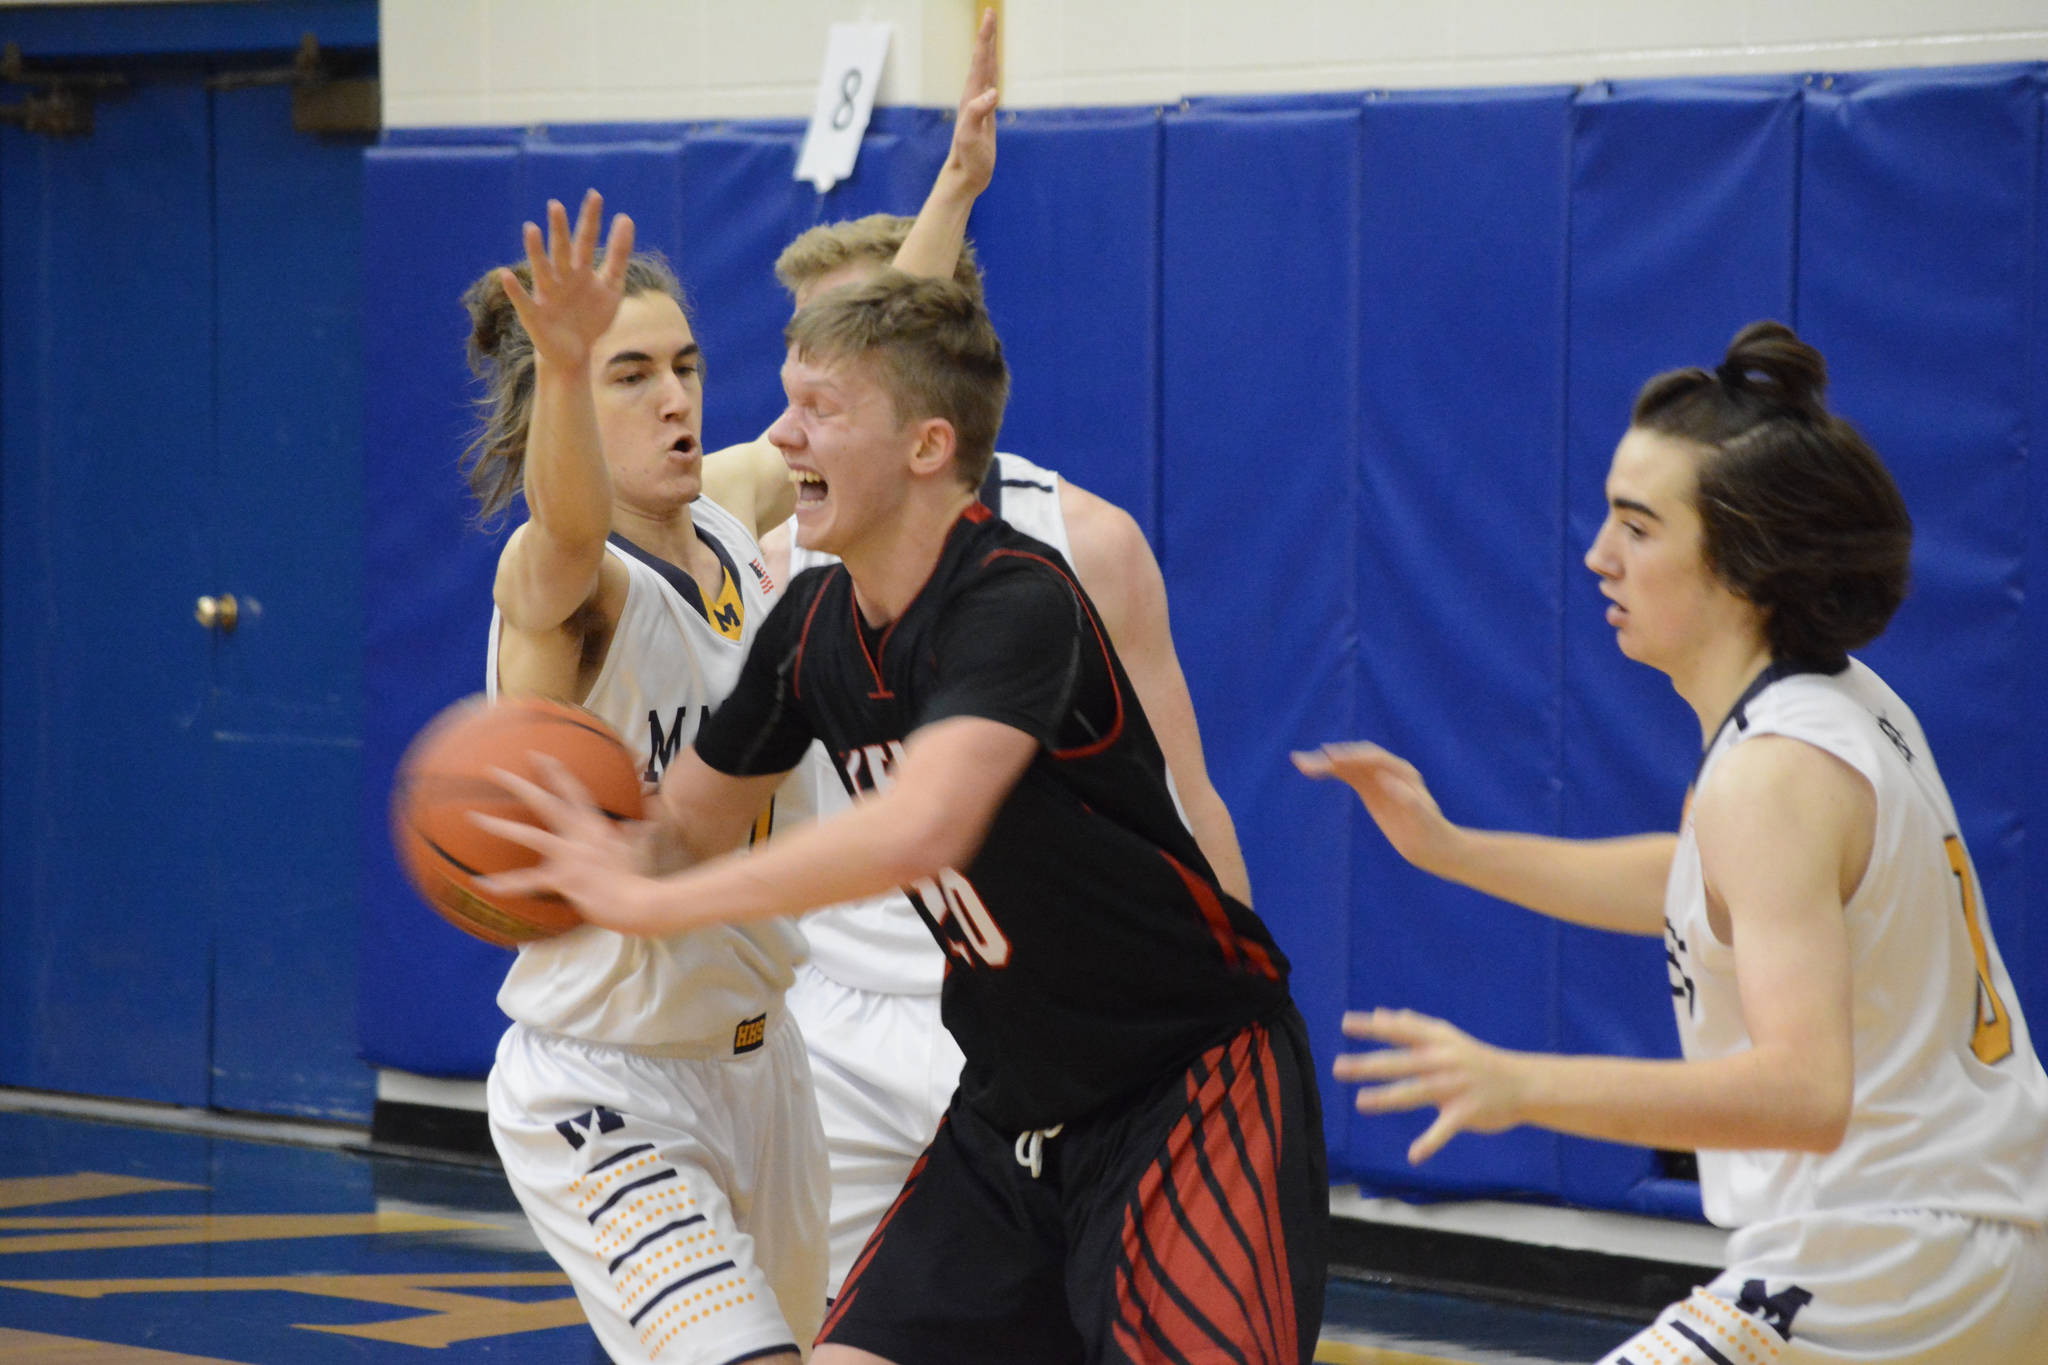 Kardinal Andrew Bezdecny tries to break away from the Mariner defense during a basketball game between the Kenai Kardinals and the Homer Mariners on Friday, Dec. 21, 2018, at the Homer High School Alice Witte Gym in Homer, Alaska. (Photo by Michael Armstrong/Homer News)